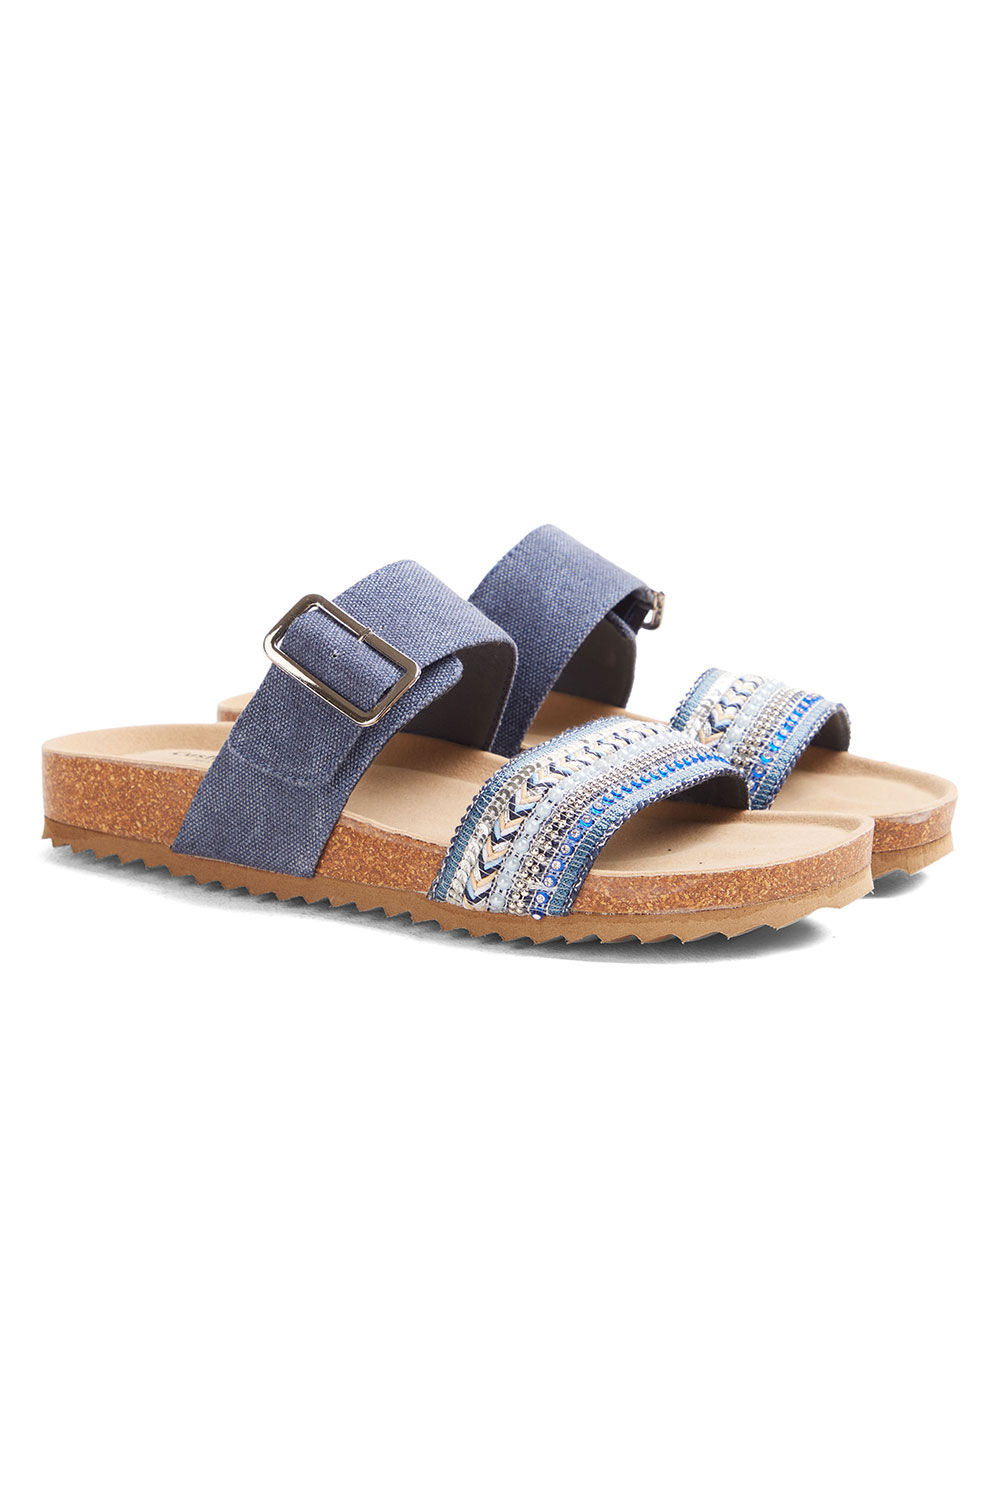 Cushion Walk Navy - Double Strap Sandal With Sequin and Buckle Detail, Size: 4